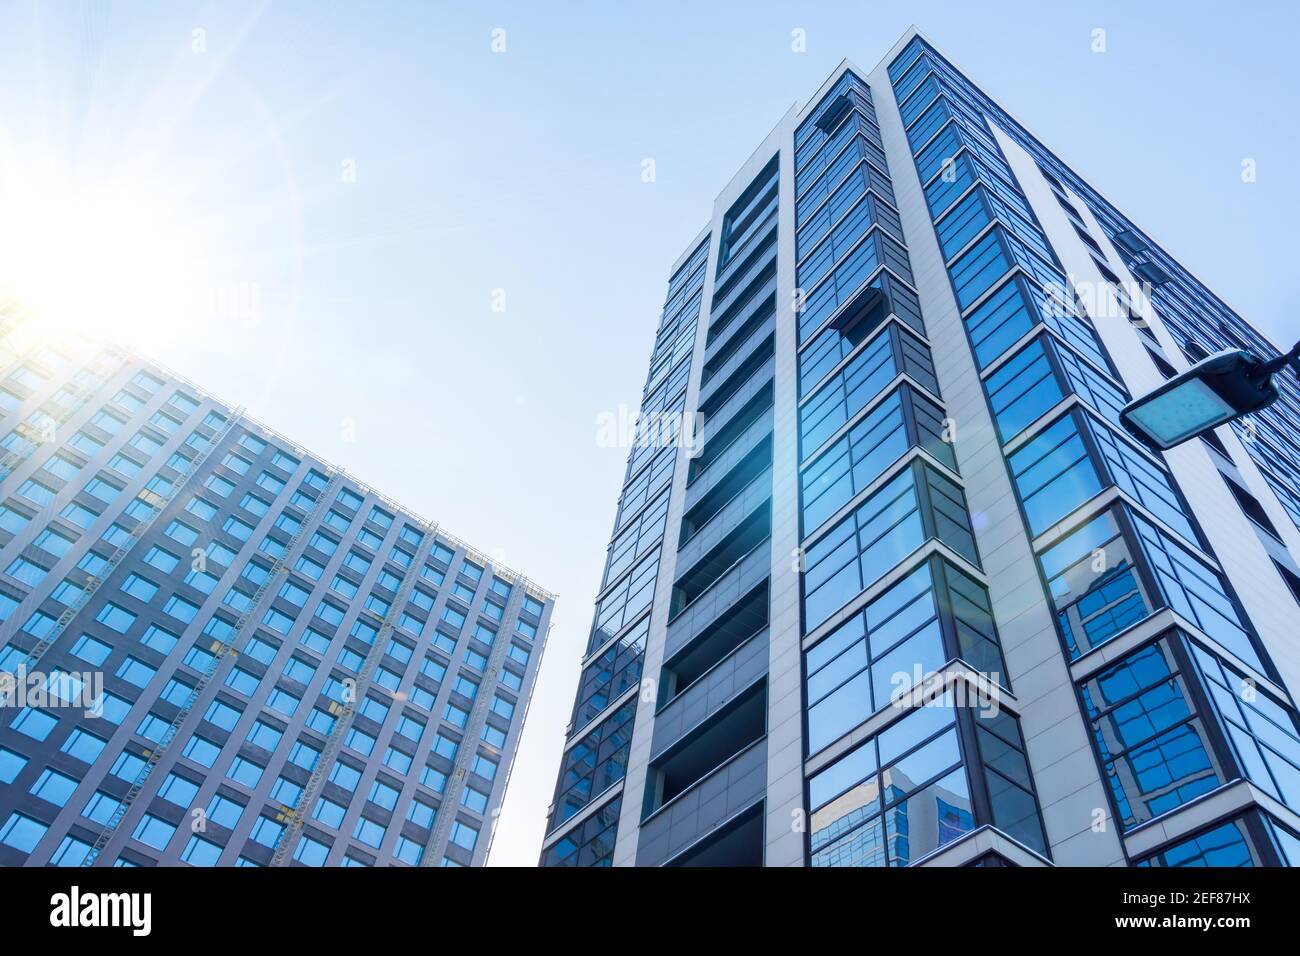 Multi-storey buildings with a glass facade and under construction with a facade department, with a bright sun in the sky Stock Photo